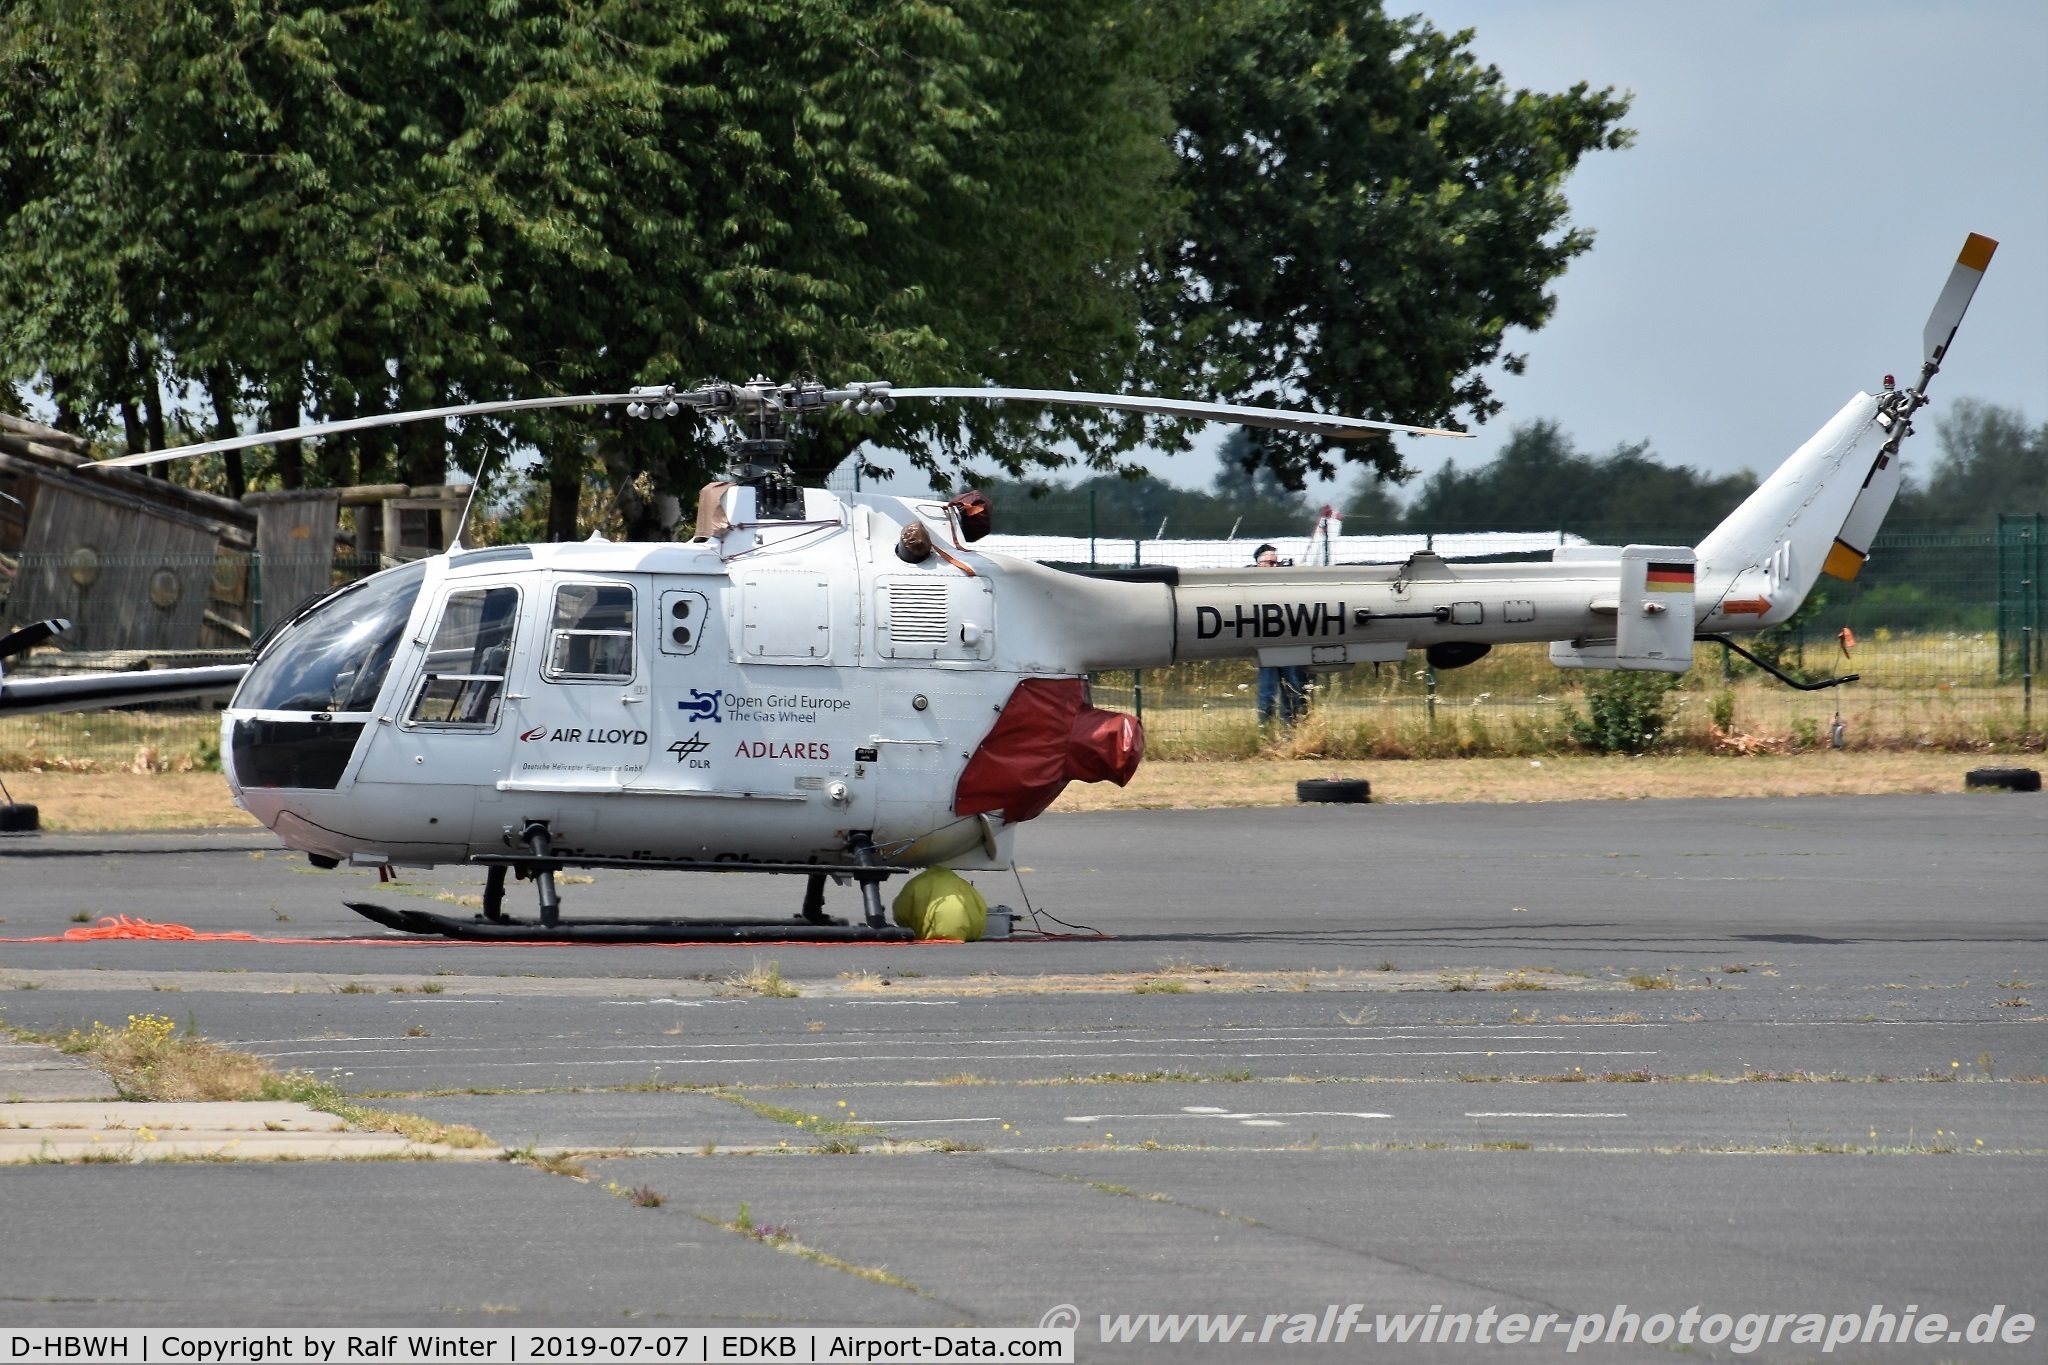 D-HBWH, 1997 MBB Bo-105CBS-5 C/N S-929, MBB Bo-105CBS-5 - Air Lloyd Deutsche Helicopter - S-929 - D-HBWH - 07.07.2019 - EDKB